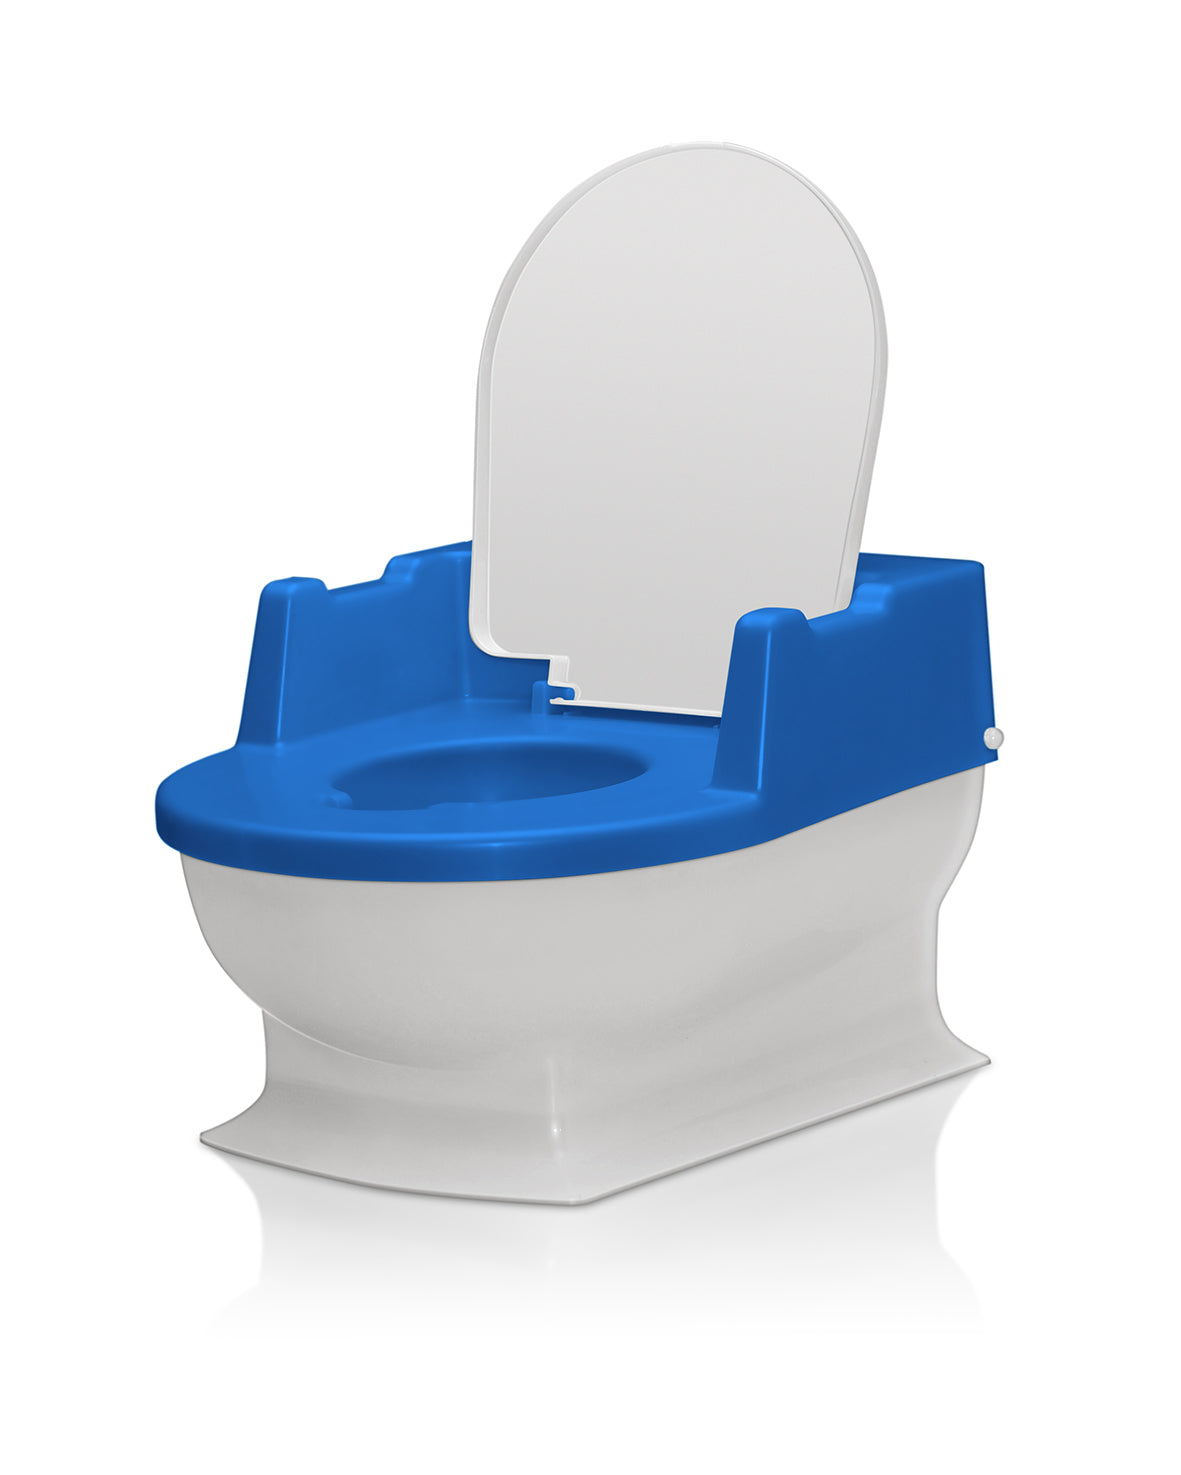 Reer Sitzfritz - The mini-toilet for growing up (Blue)